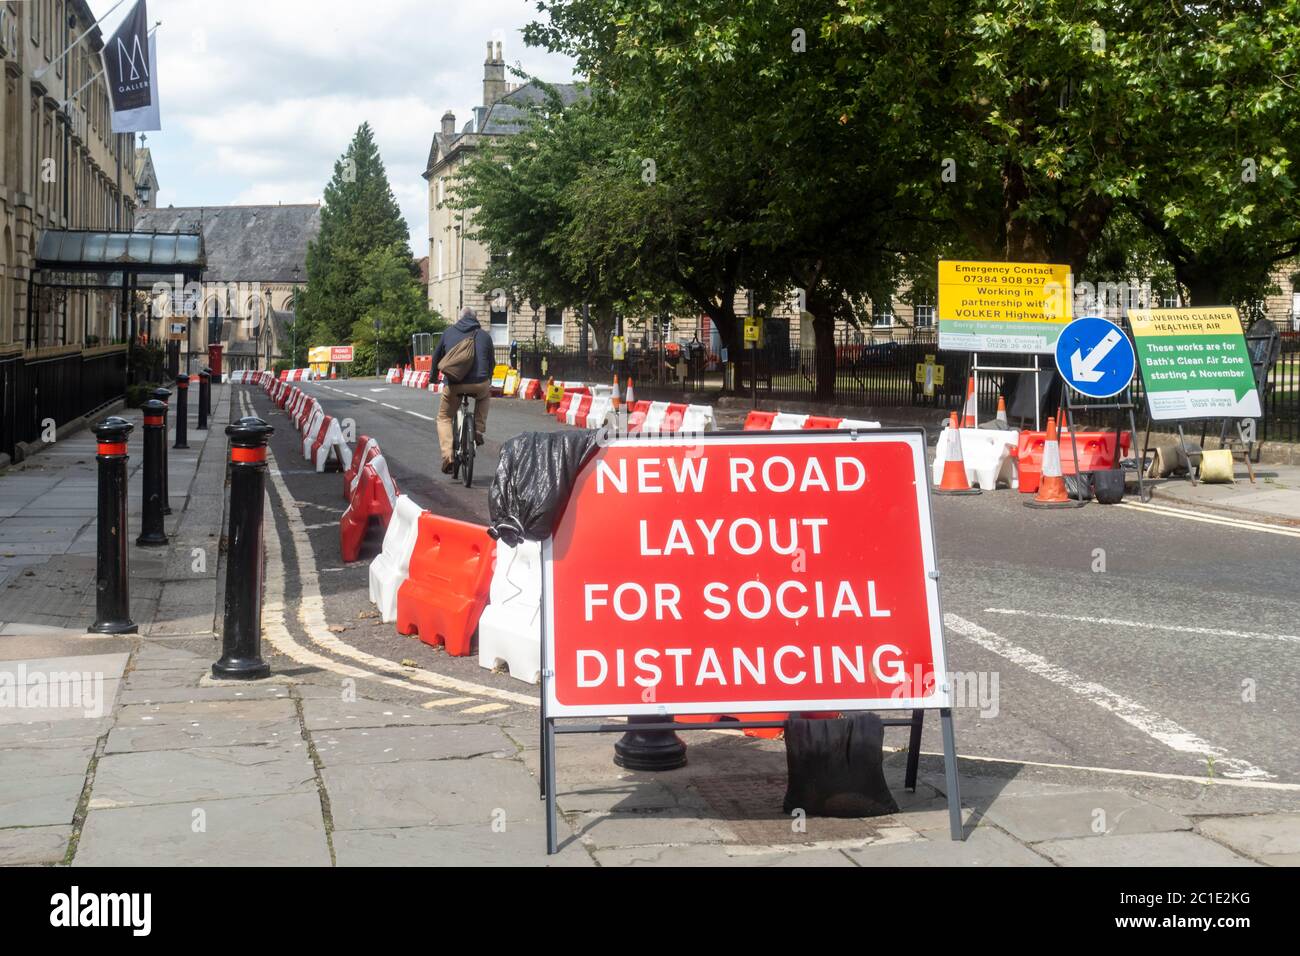 Non essential shops reopen in Bath. Pavements widened in the City with street barriiers in place so social distancing measures can be met. England, UK Stock Photo